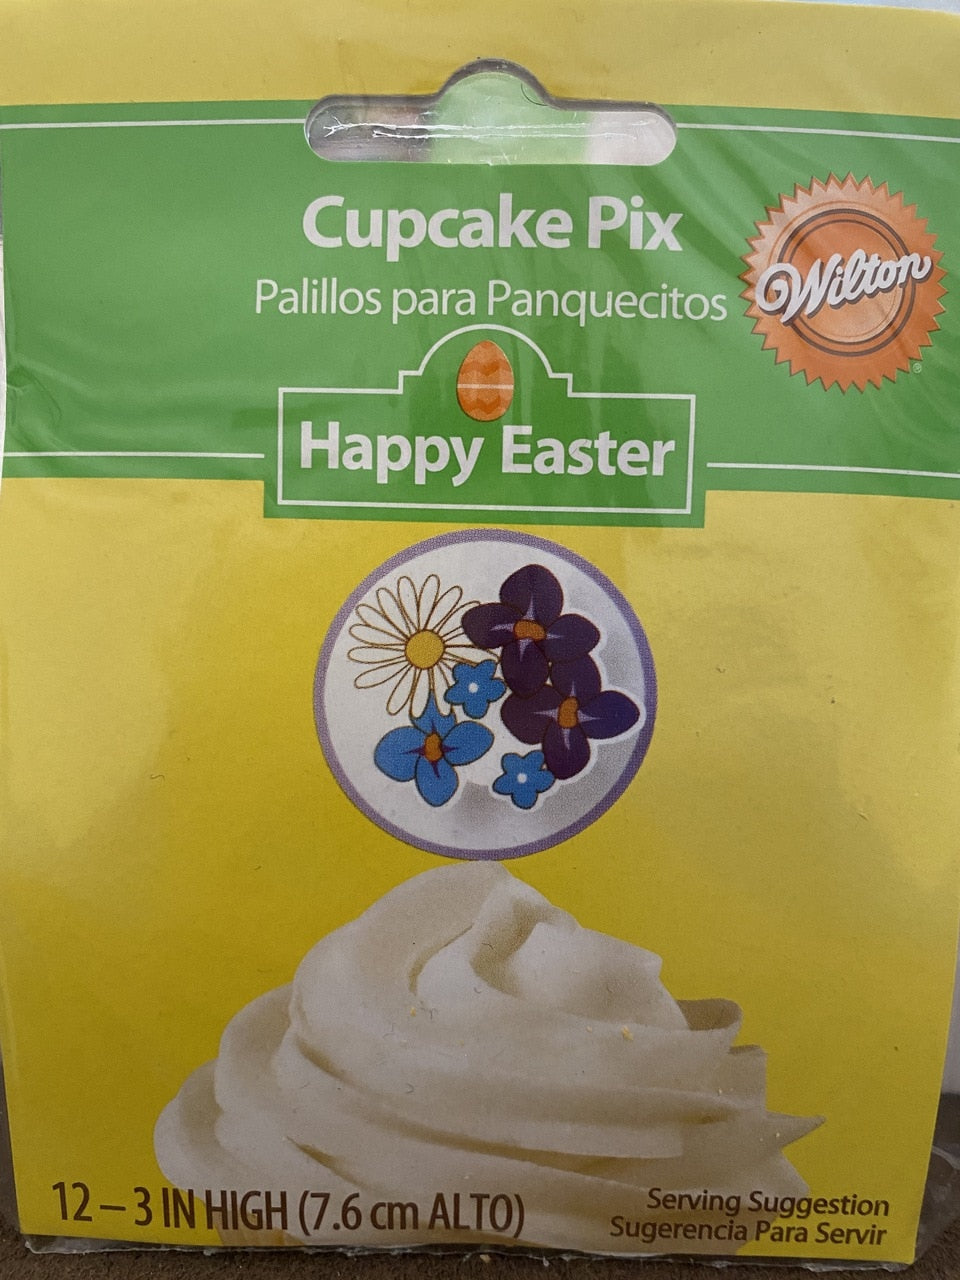 Wilton Happy Easter Cupcake Pix For 2 packs (24 Pix) Toothpick